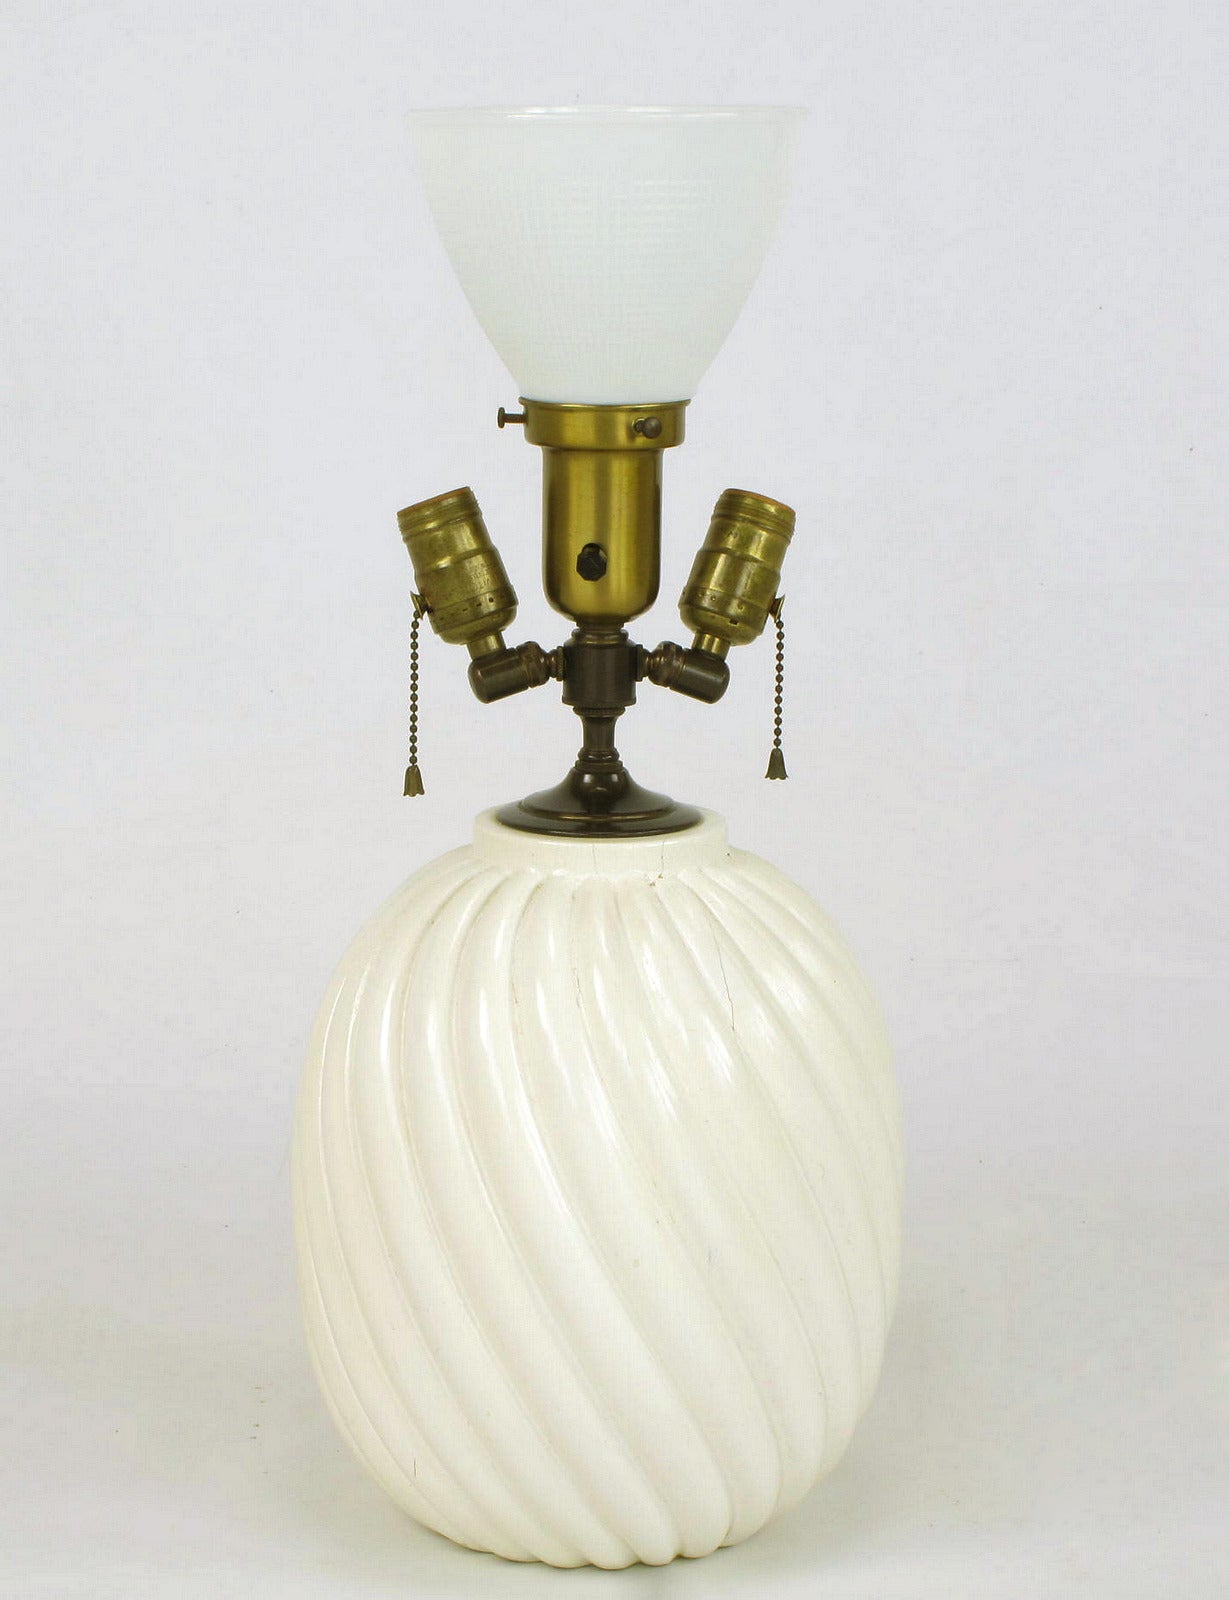 Uncommon spiral carved table lamp constructed of solid wood with an off-white gloss lacquer finish. Three brass light sources with a center milk glass diffuser and side adjustable sockets. Sold sans shade.